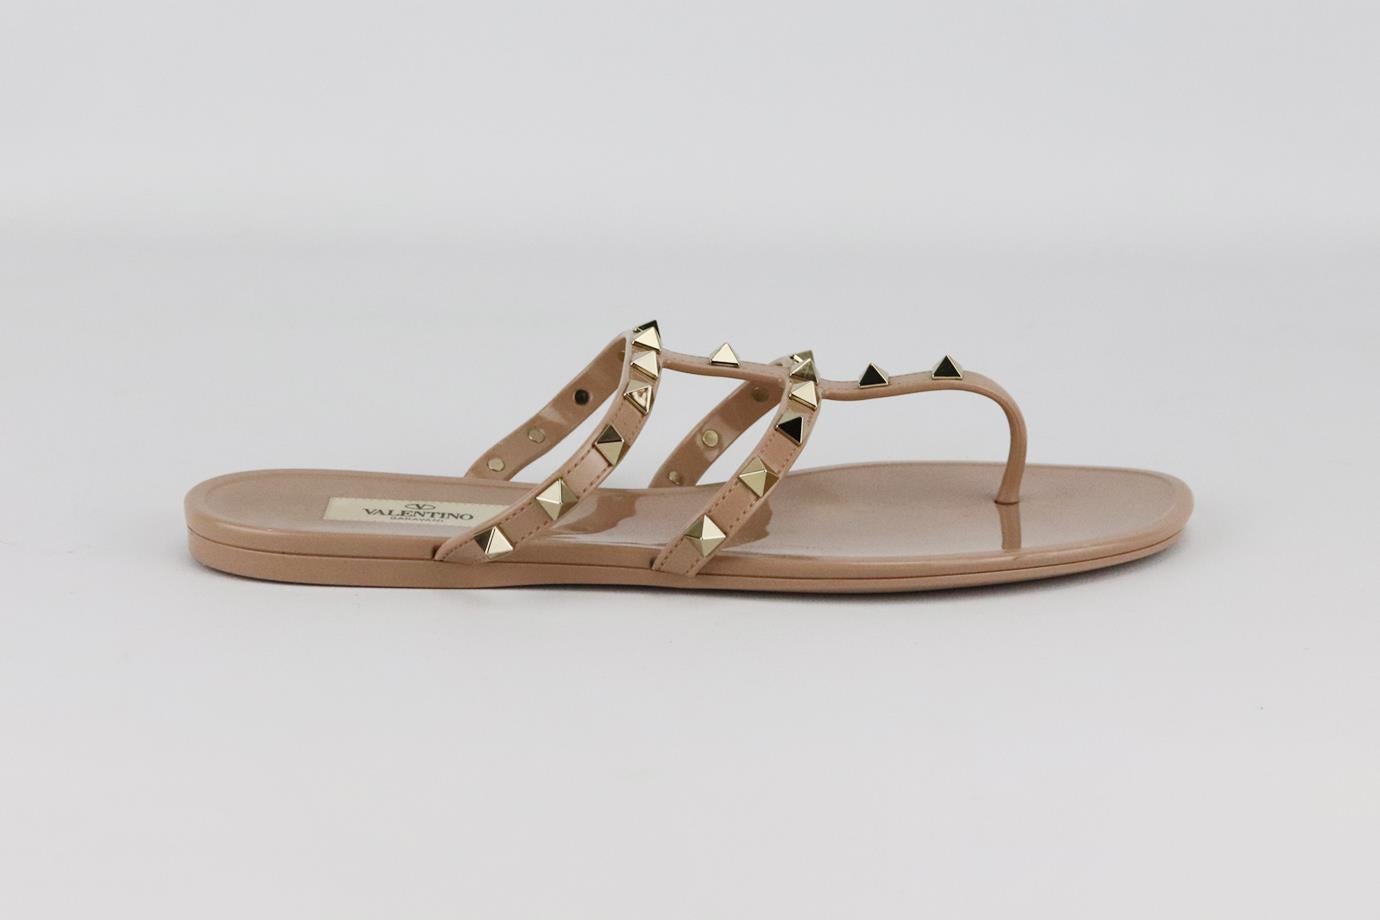 Valentino Garavani Rockstud rubber sandals. Dusty-pink. Slips on. Does not come with box or dustbag. Size: EU 39 (UK 6, US 9). Insole: 10 in. Heel: 0.5 in
